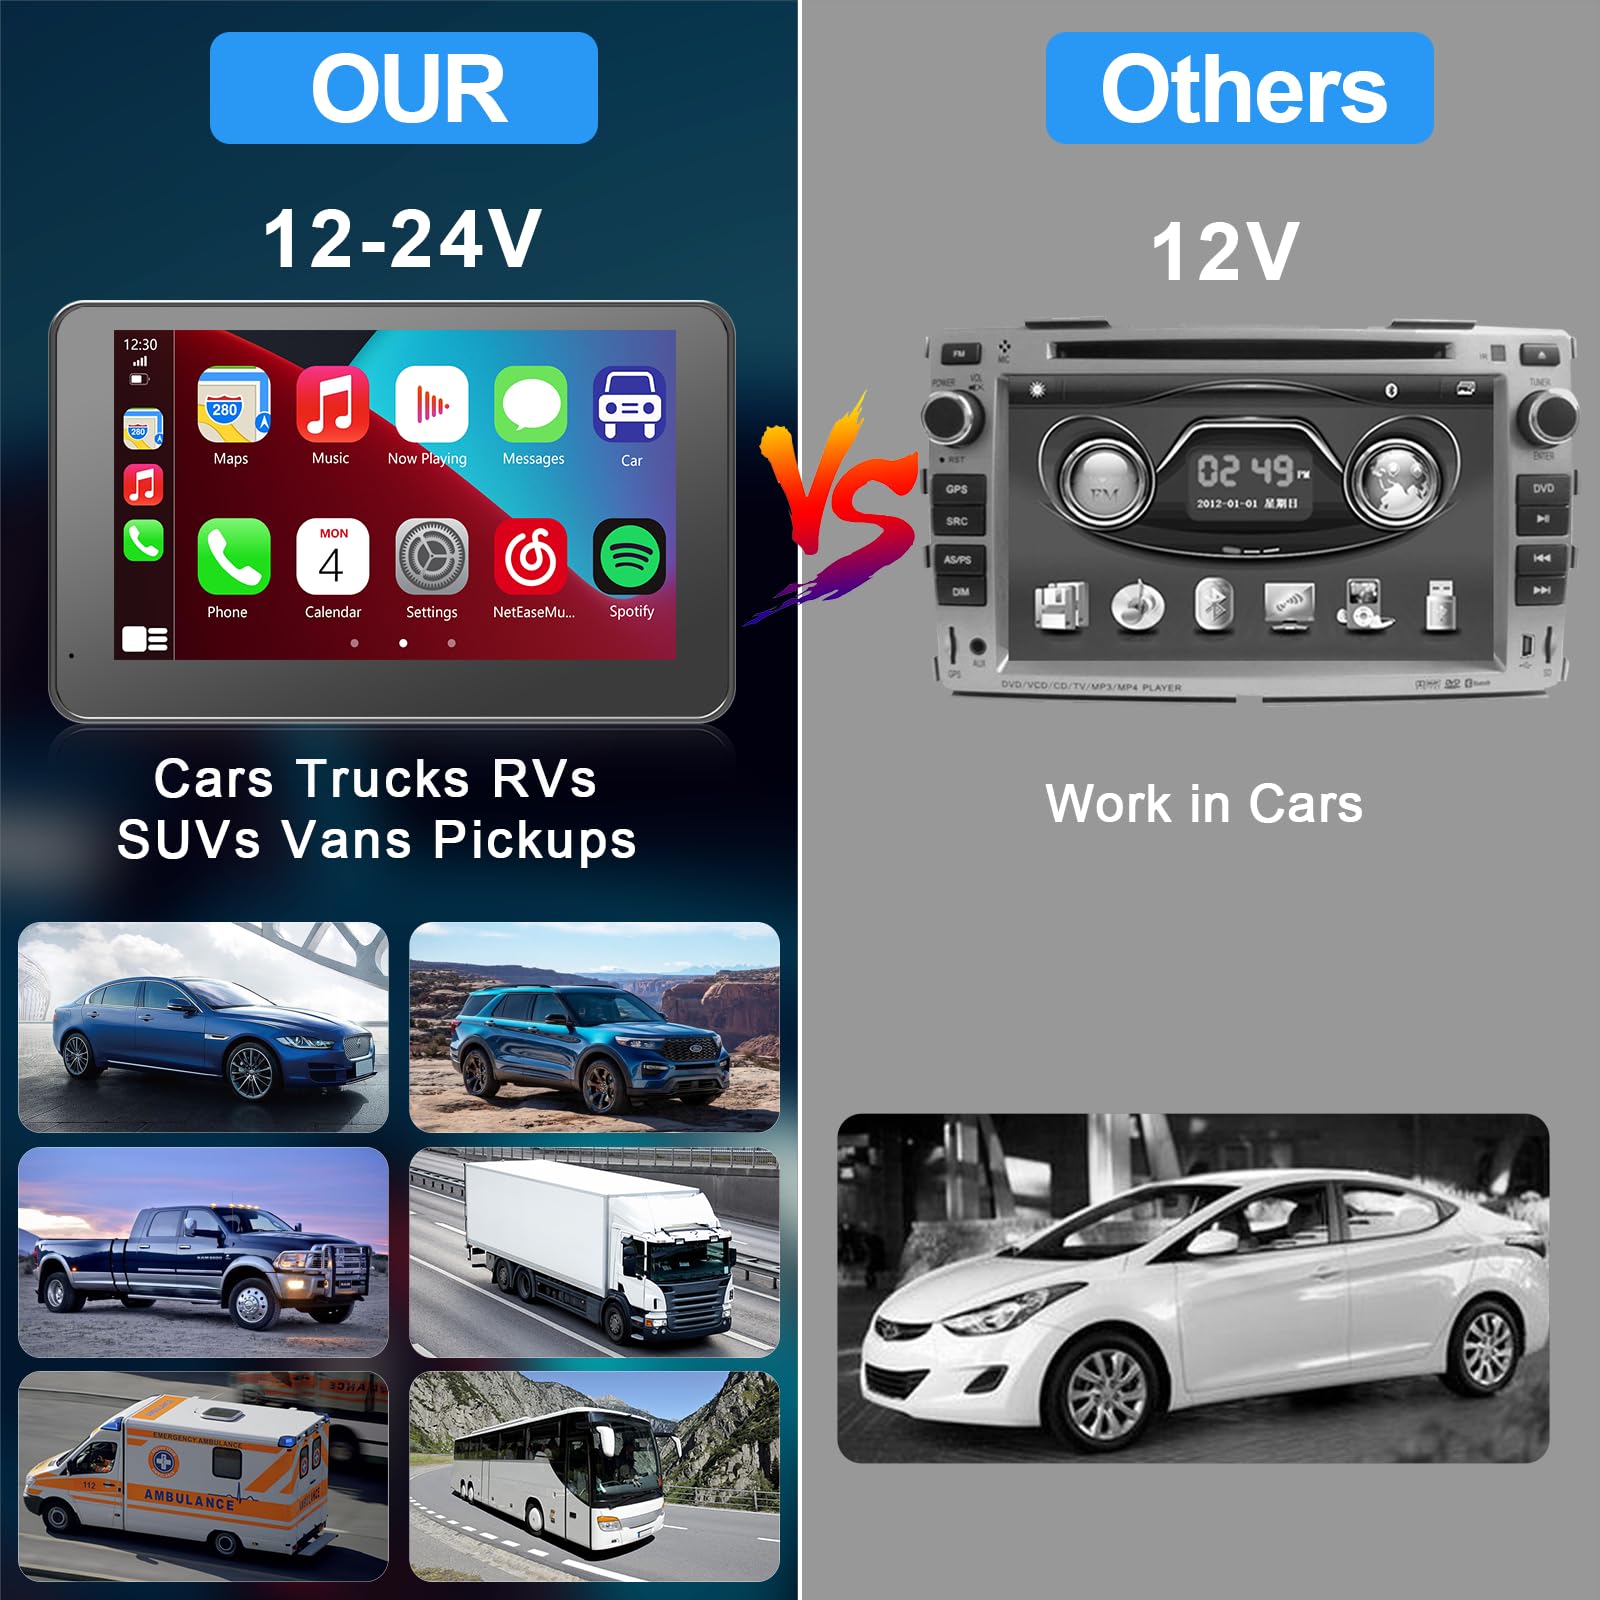 Newest Wireless Portable Car Stereo with Apple Carplay/Android Auto/Mirror Link for Car Truck RV Vehicles, Dash Mount Touchscreen Car Multimedia Player with Bluetooth & Backup Camera, Auto Connect